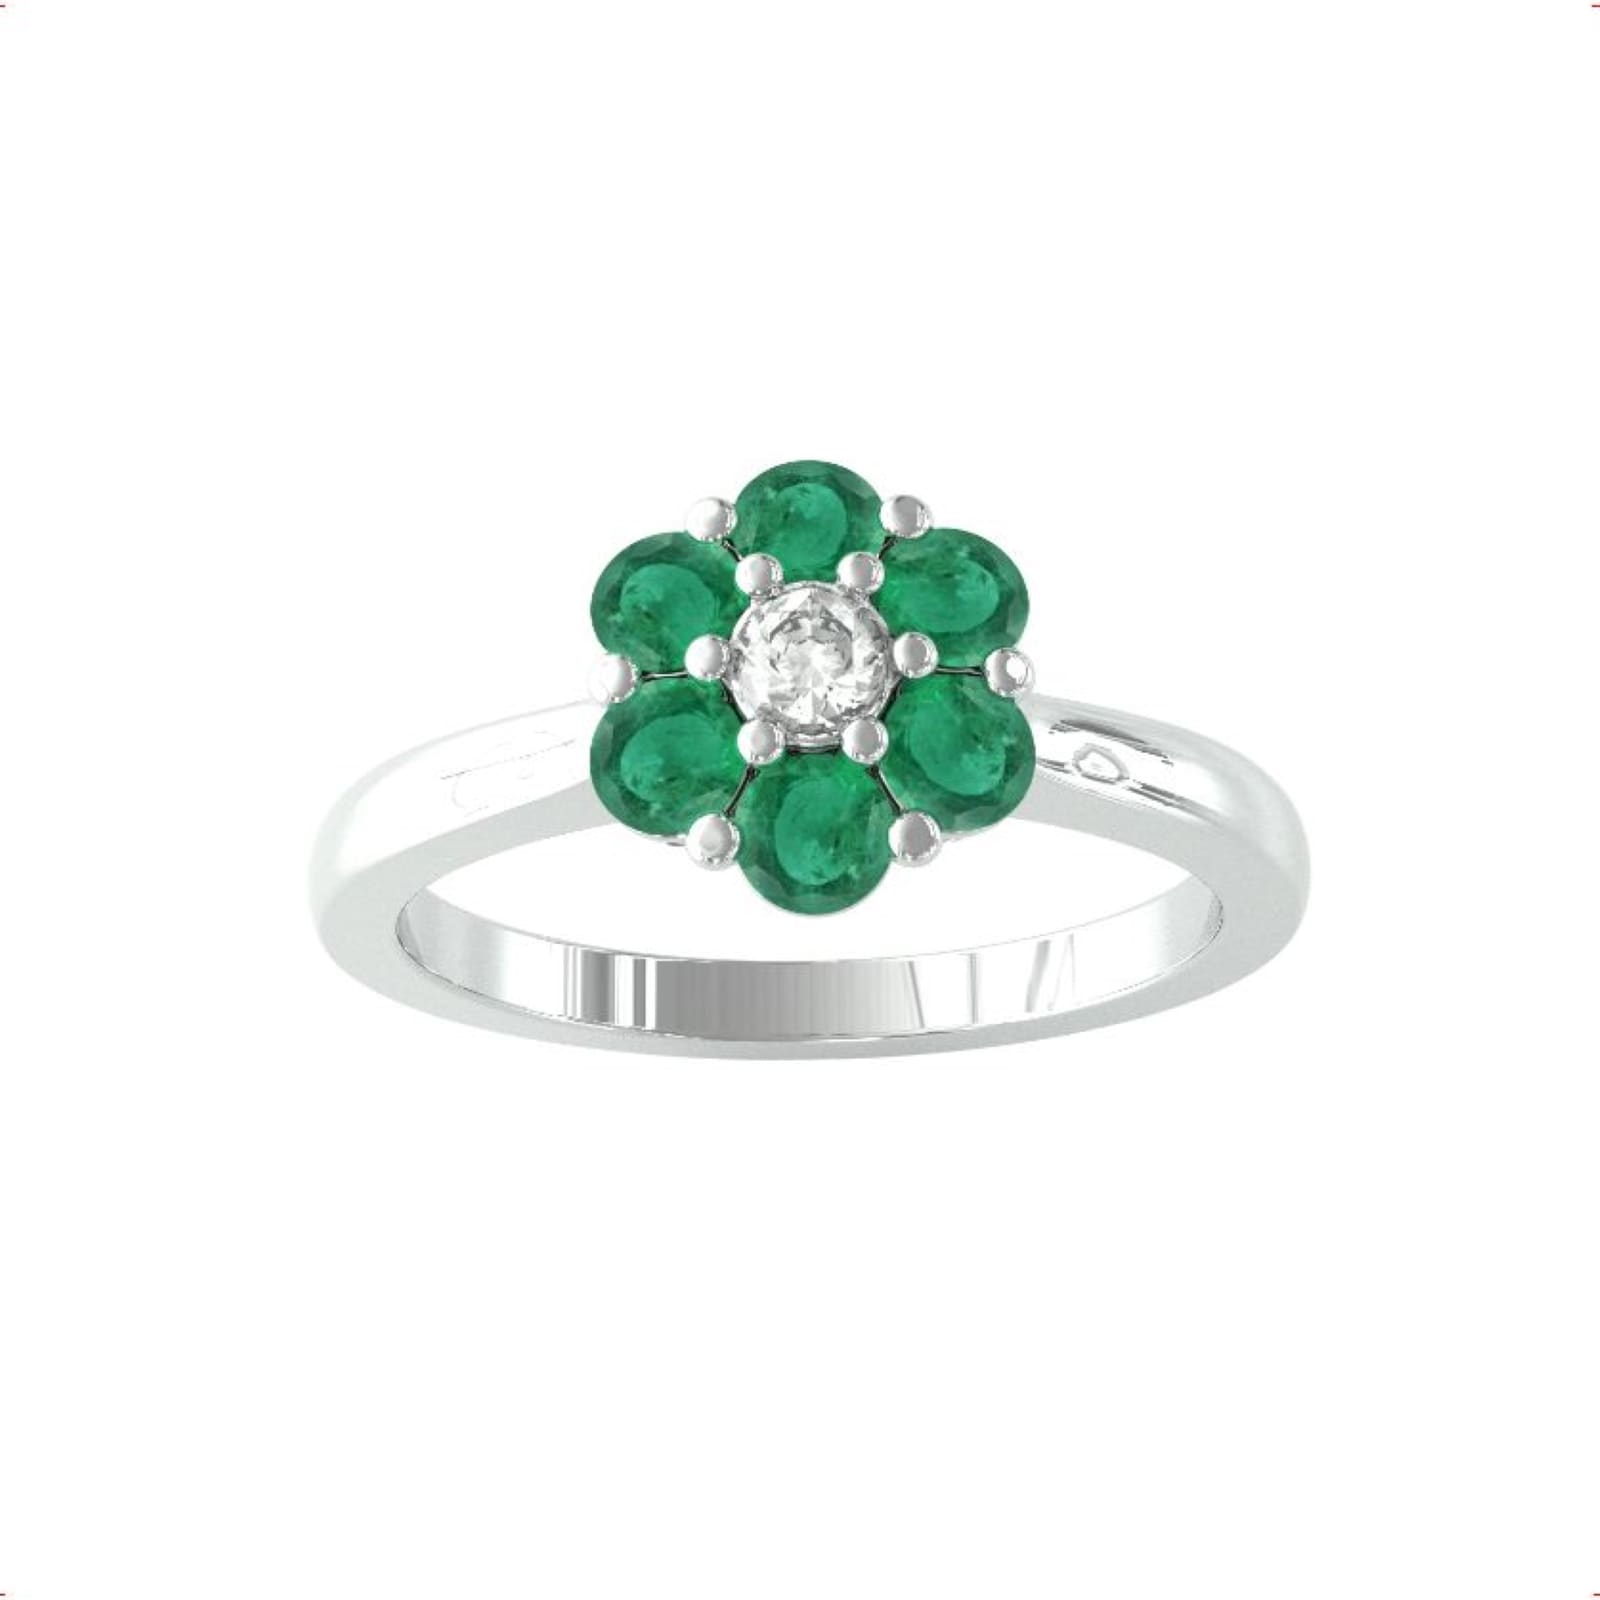 9ct White Gold Emerald & Diamond Cluster Ring - Ring Size L.5